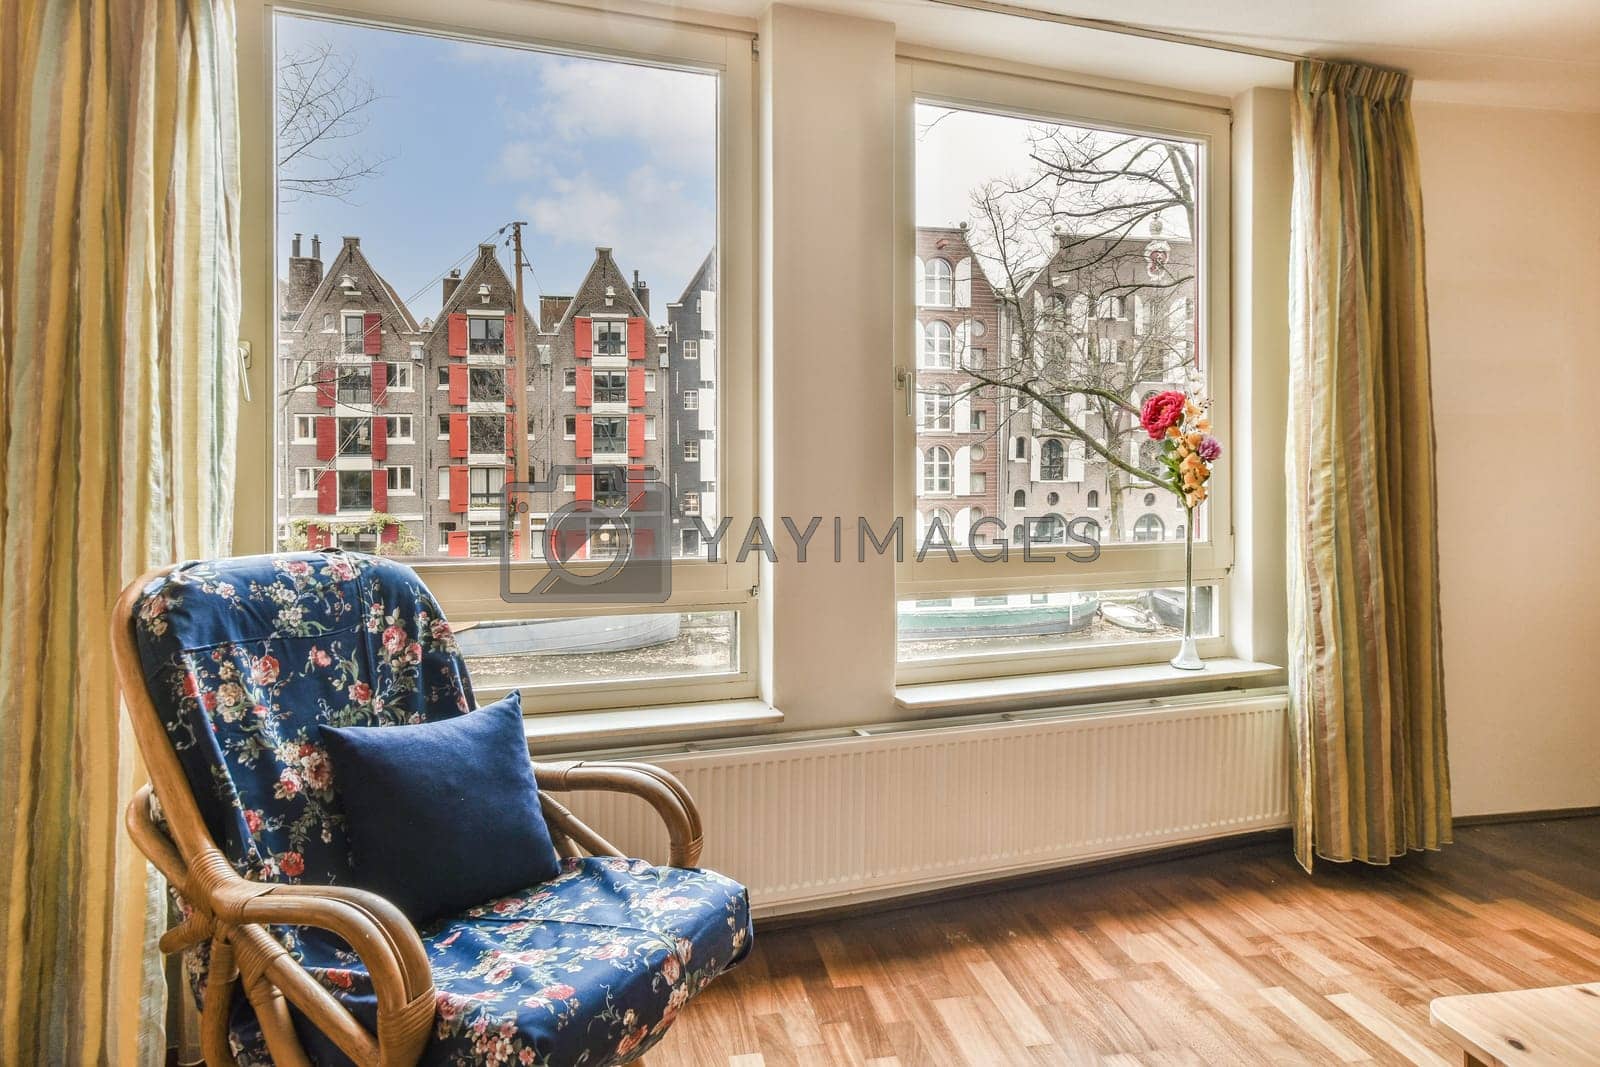 Royalty free image of a room with a chair and a window with houses by casamedia